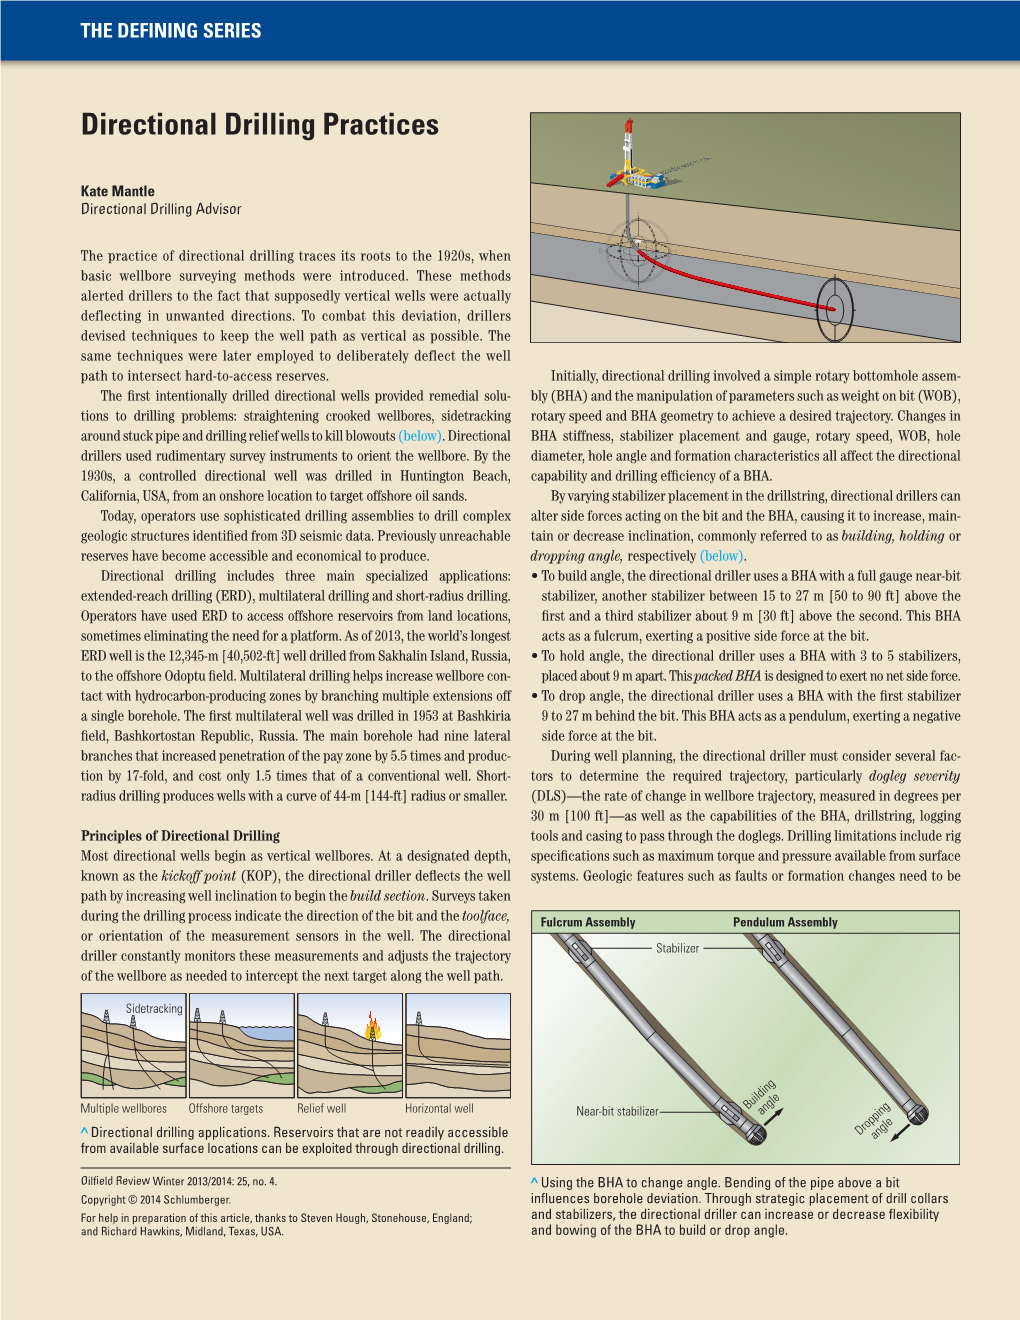 Directional Drilling Practices